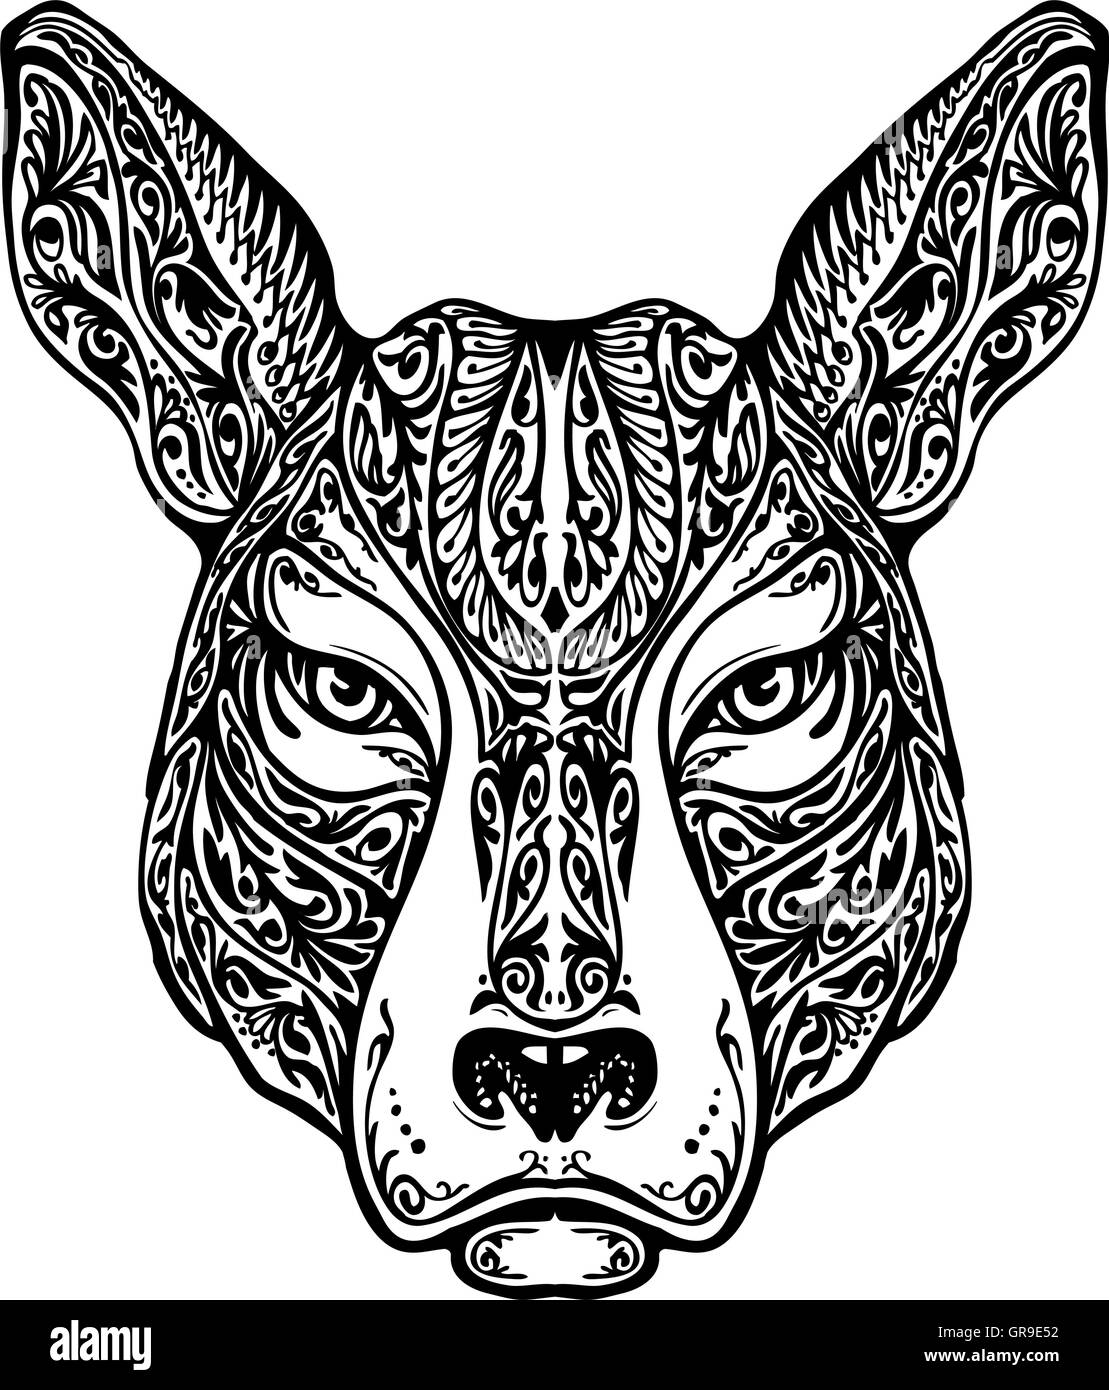 Ethnic ornamented dog, pit bull terrier or kangaroo. Hand drawn vector illustration with floral elements Stock Vector